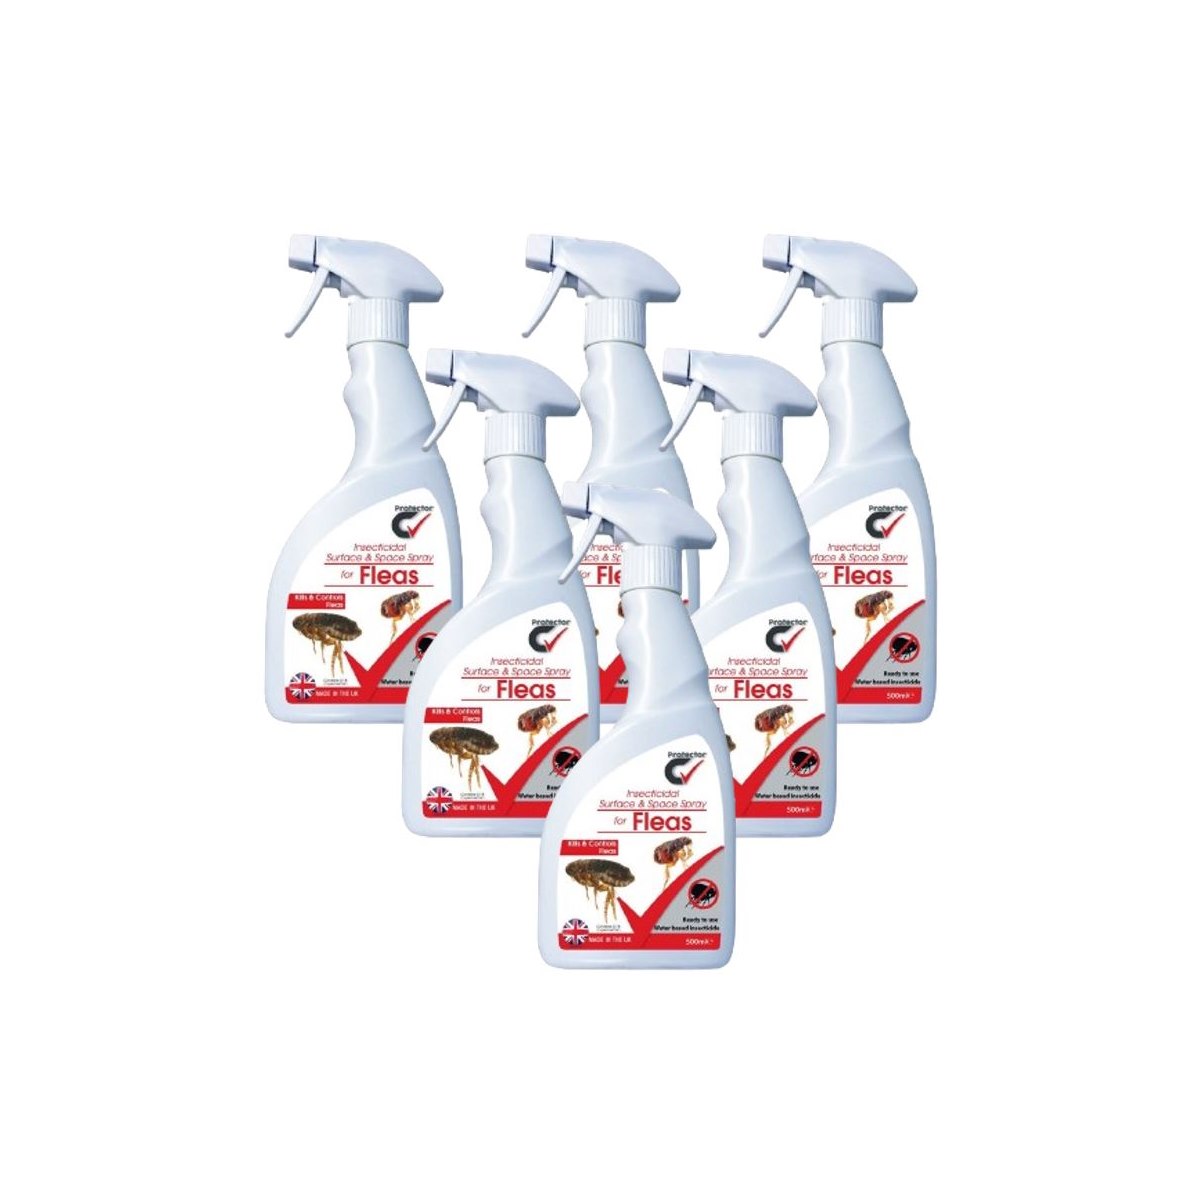 Case of 6 x Protector C Insecticidal Spray For Fleas 500ml